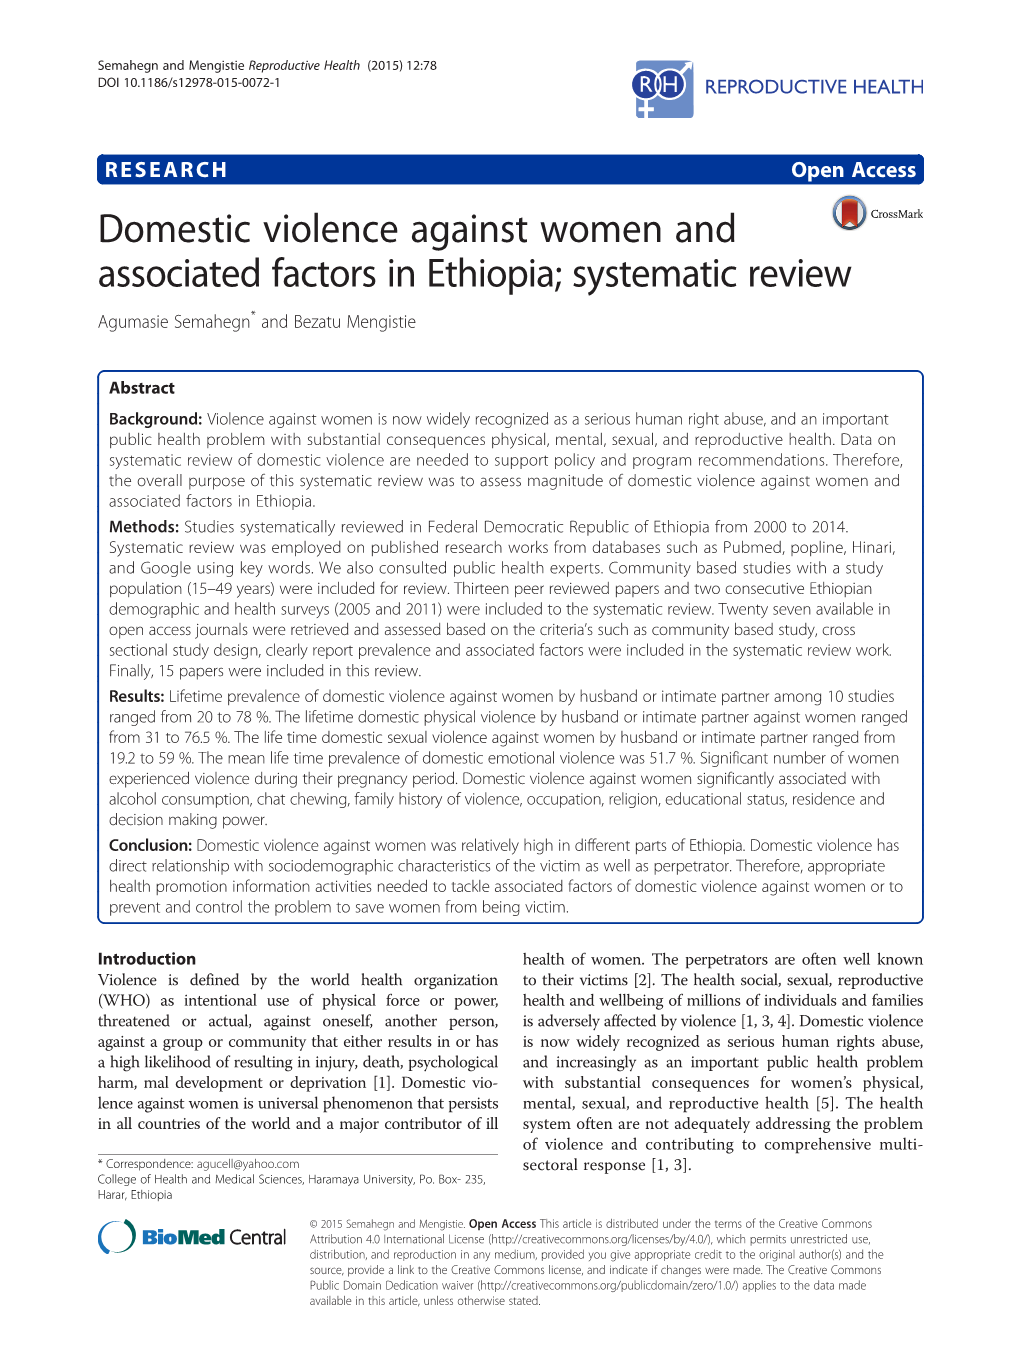 Domestic Violence Against Women and Associated Factors in Ethiopia; Systematic Review Agumasie Semahegn* and Bezatu Mengistie